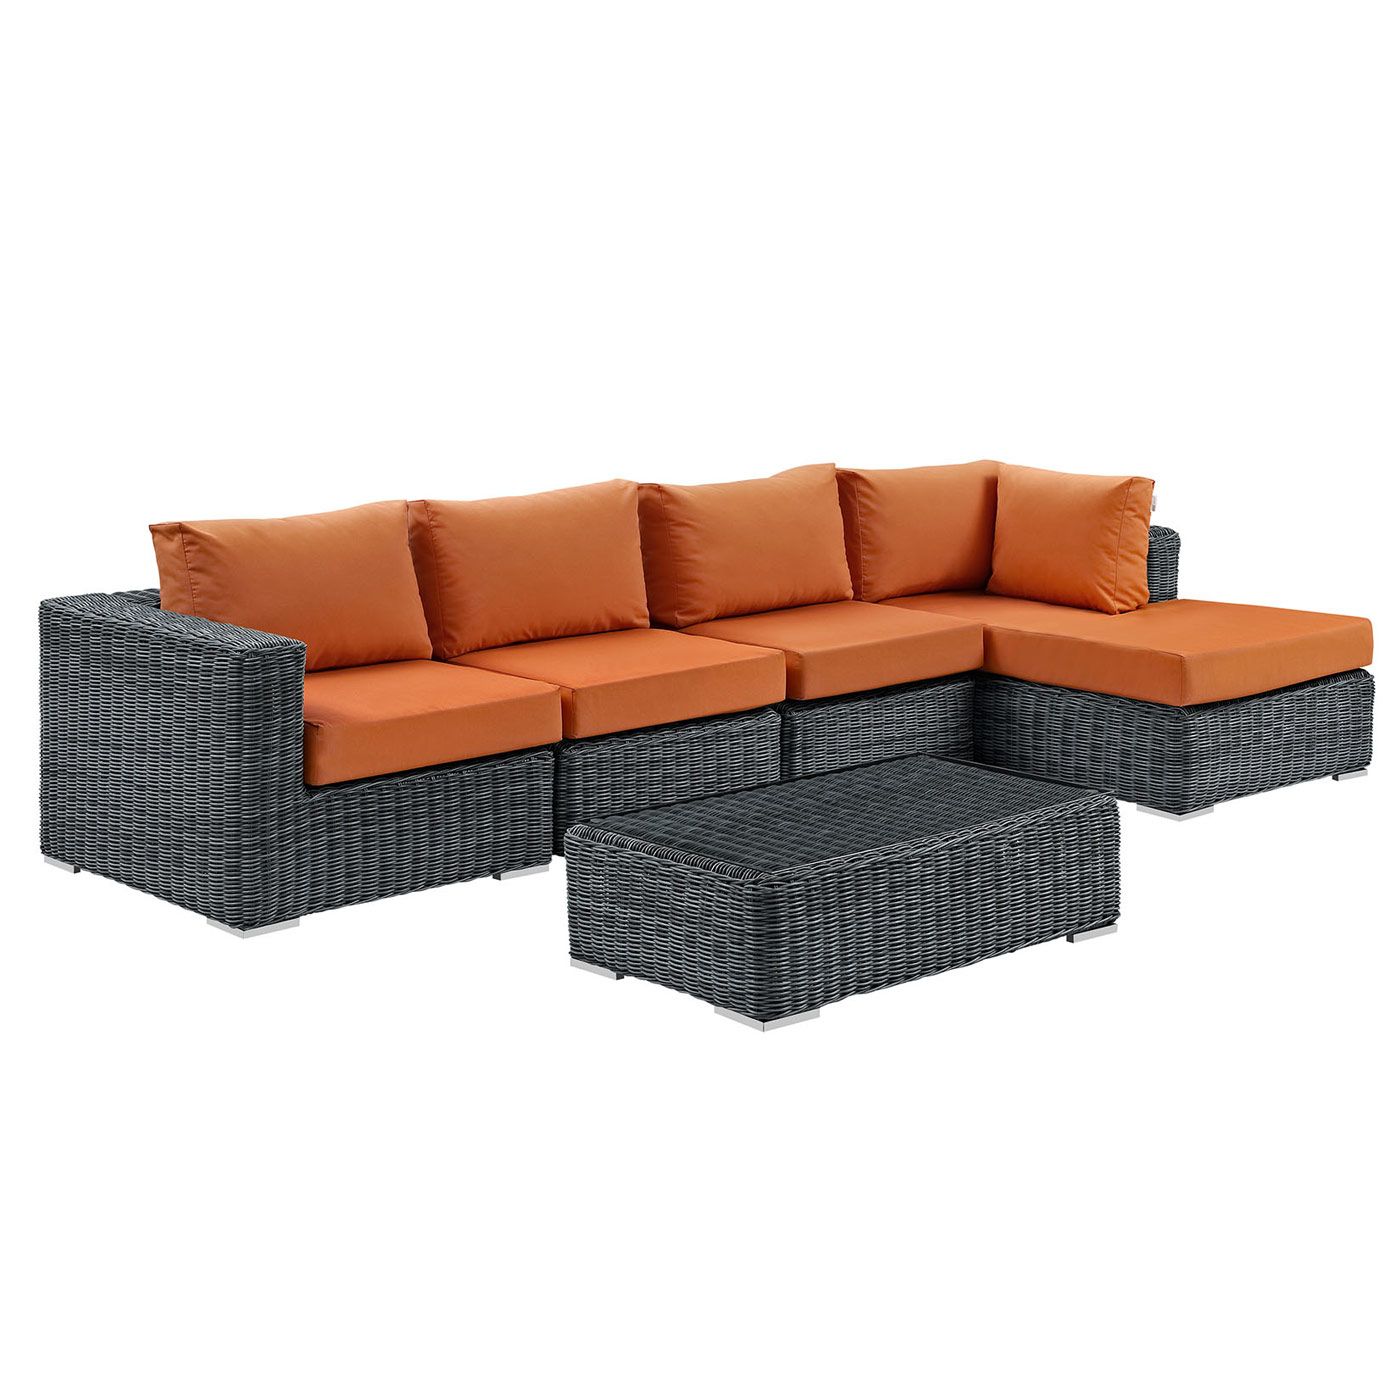 Modway Summon 5 Piece Patio Sofa Sectional Set With Coffee Table Free In 5 Piece Console Tables (View 9 of 20)